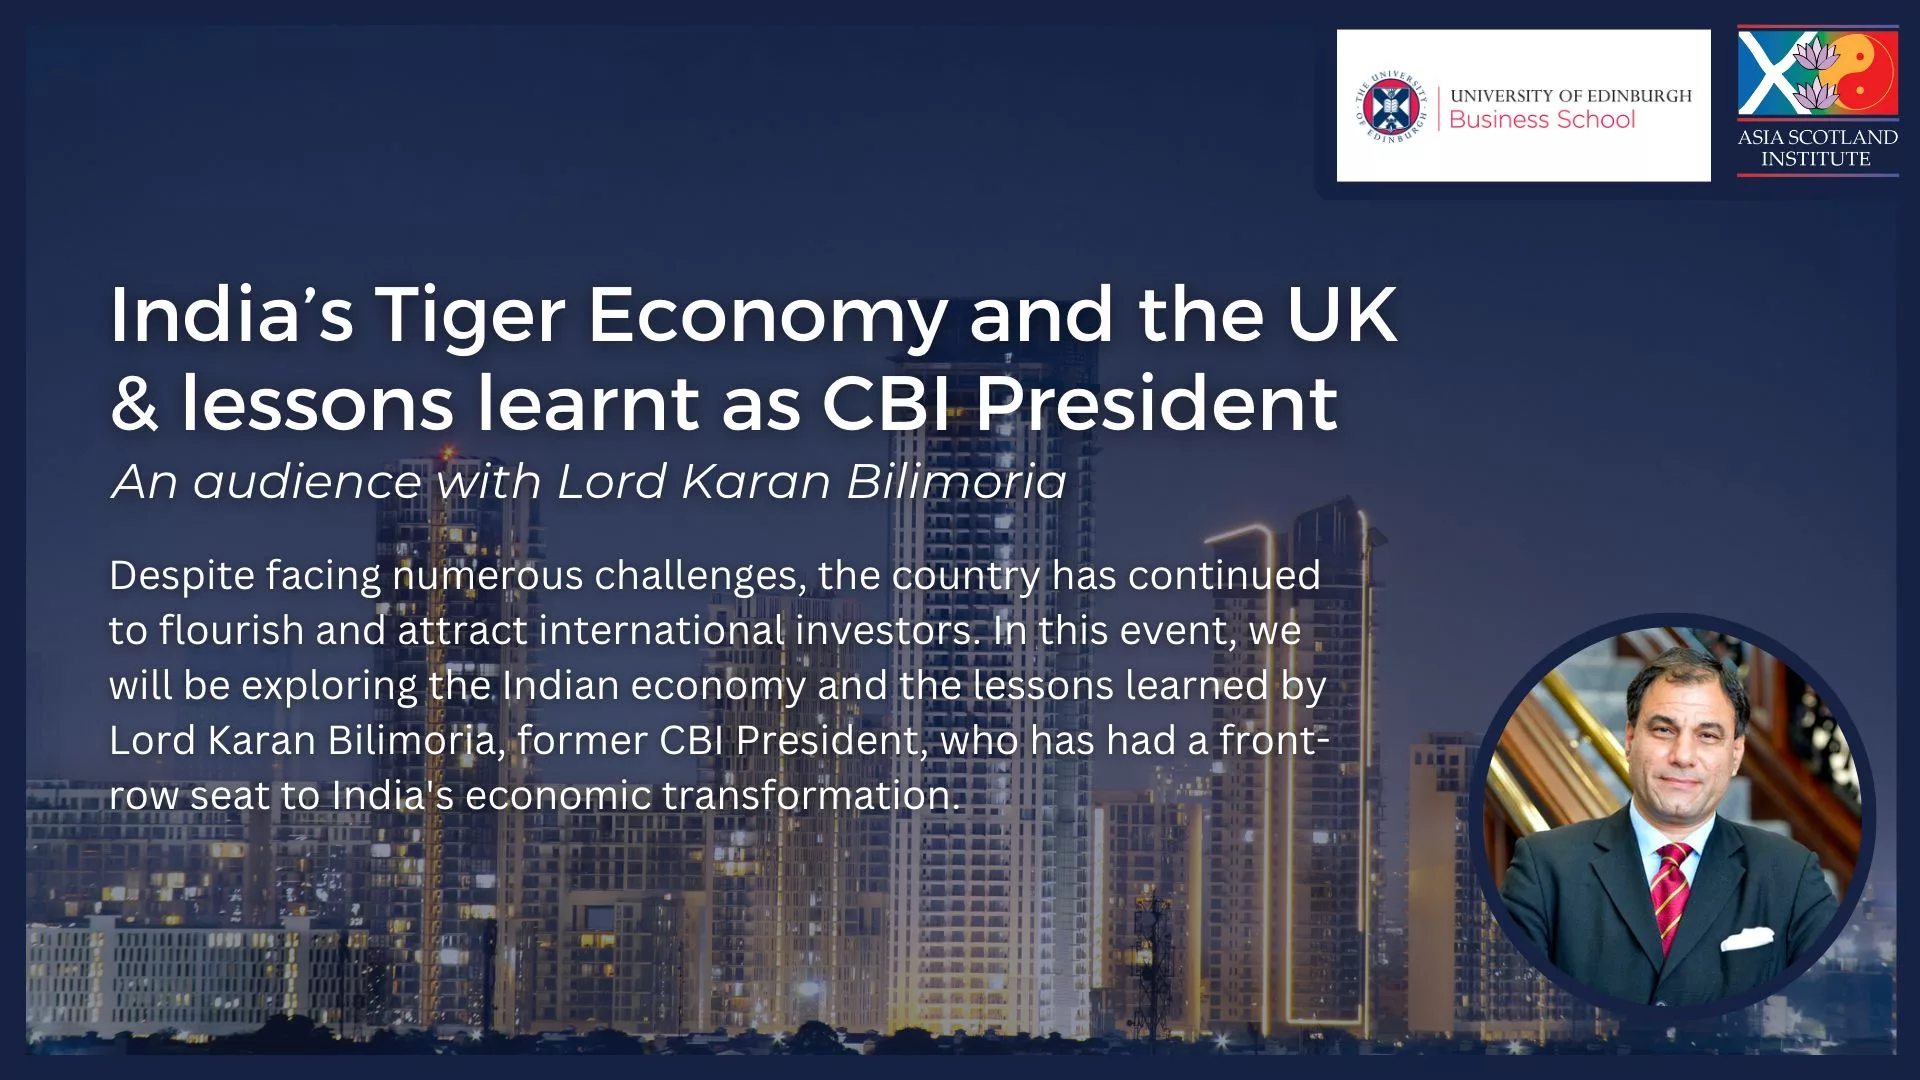 Indias Tiger Economy and the UK lessons learnt as CBI President 1920 × 1080 px jpg